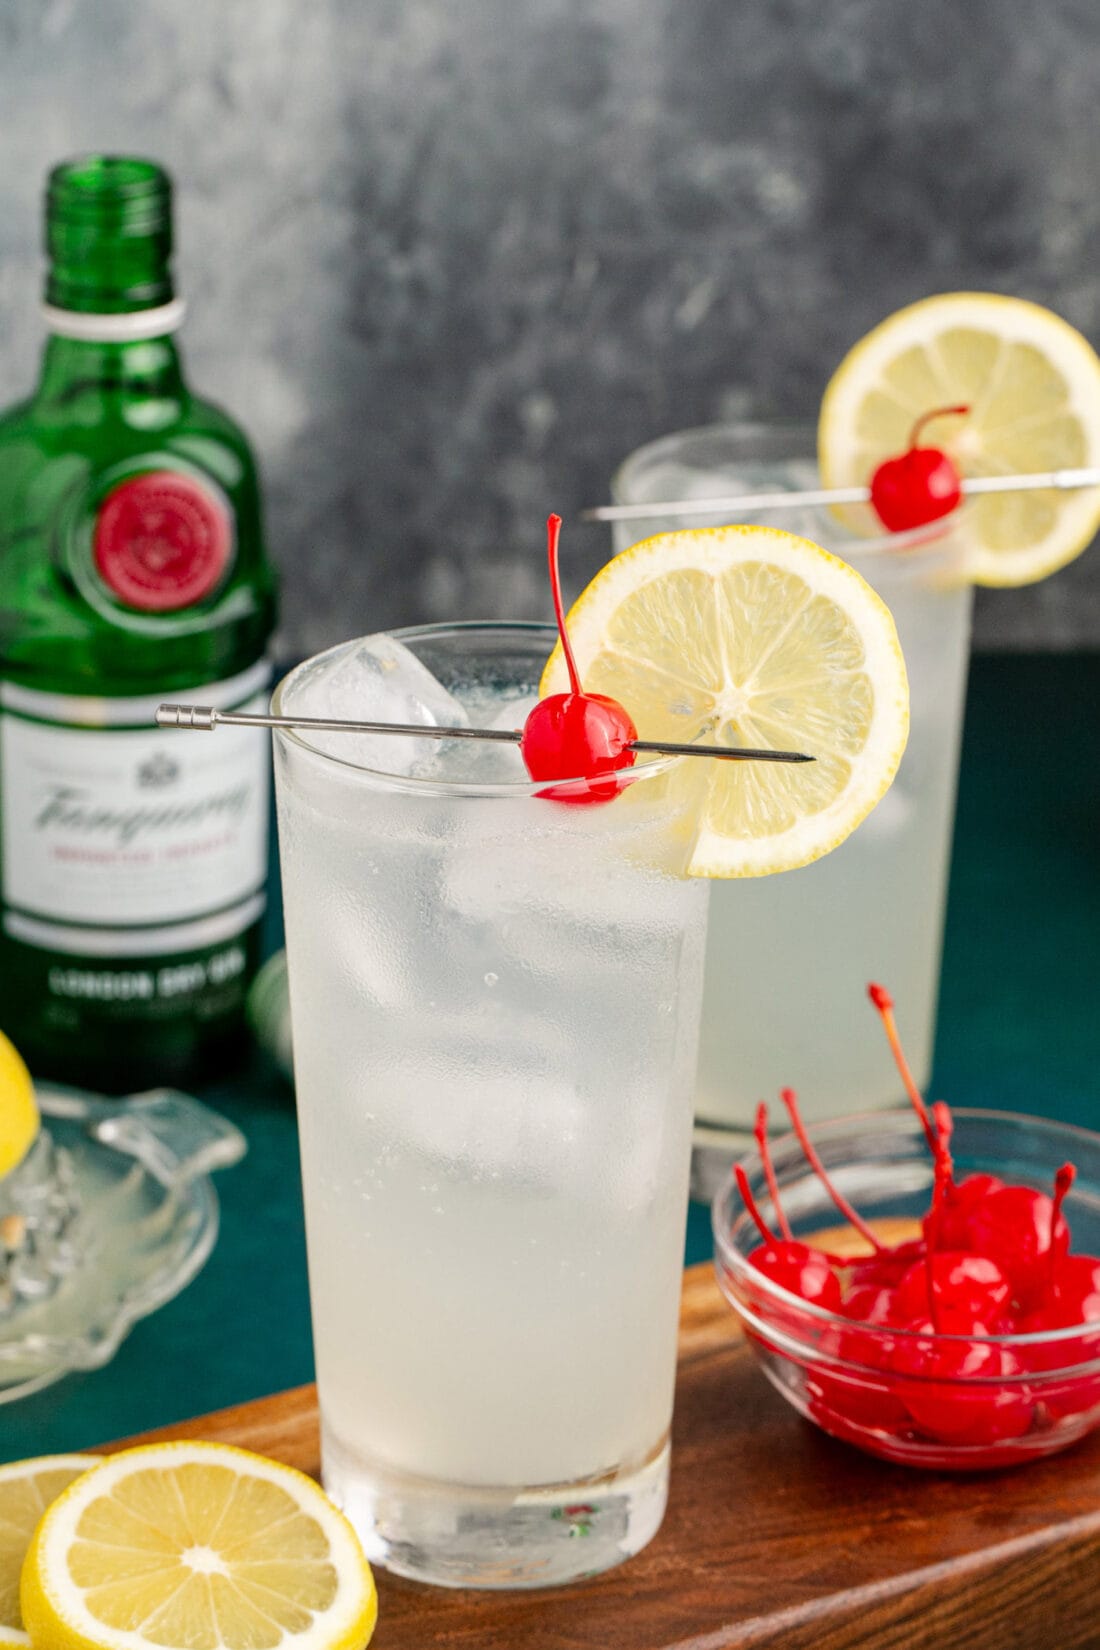 Two Tom Collins cocktails garnished with a lemon wheel and cherry